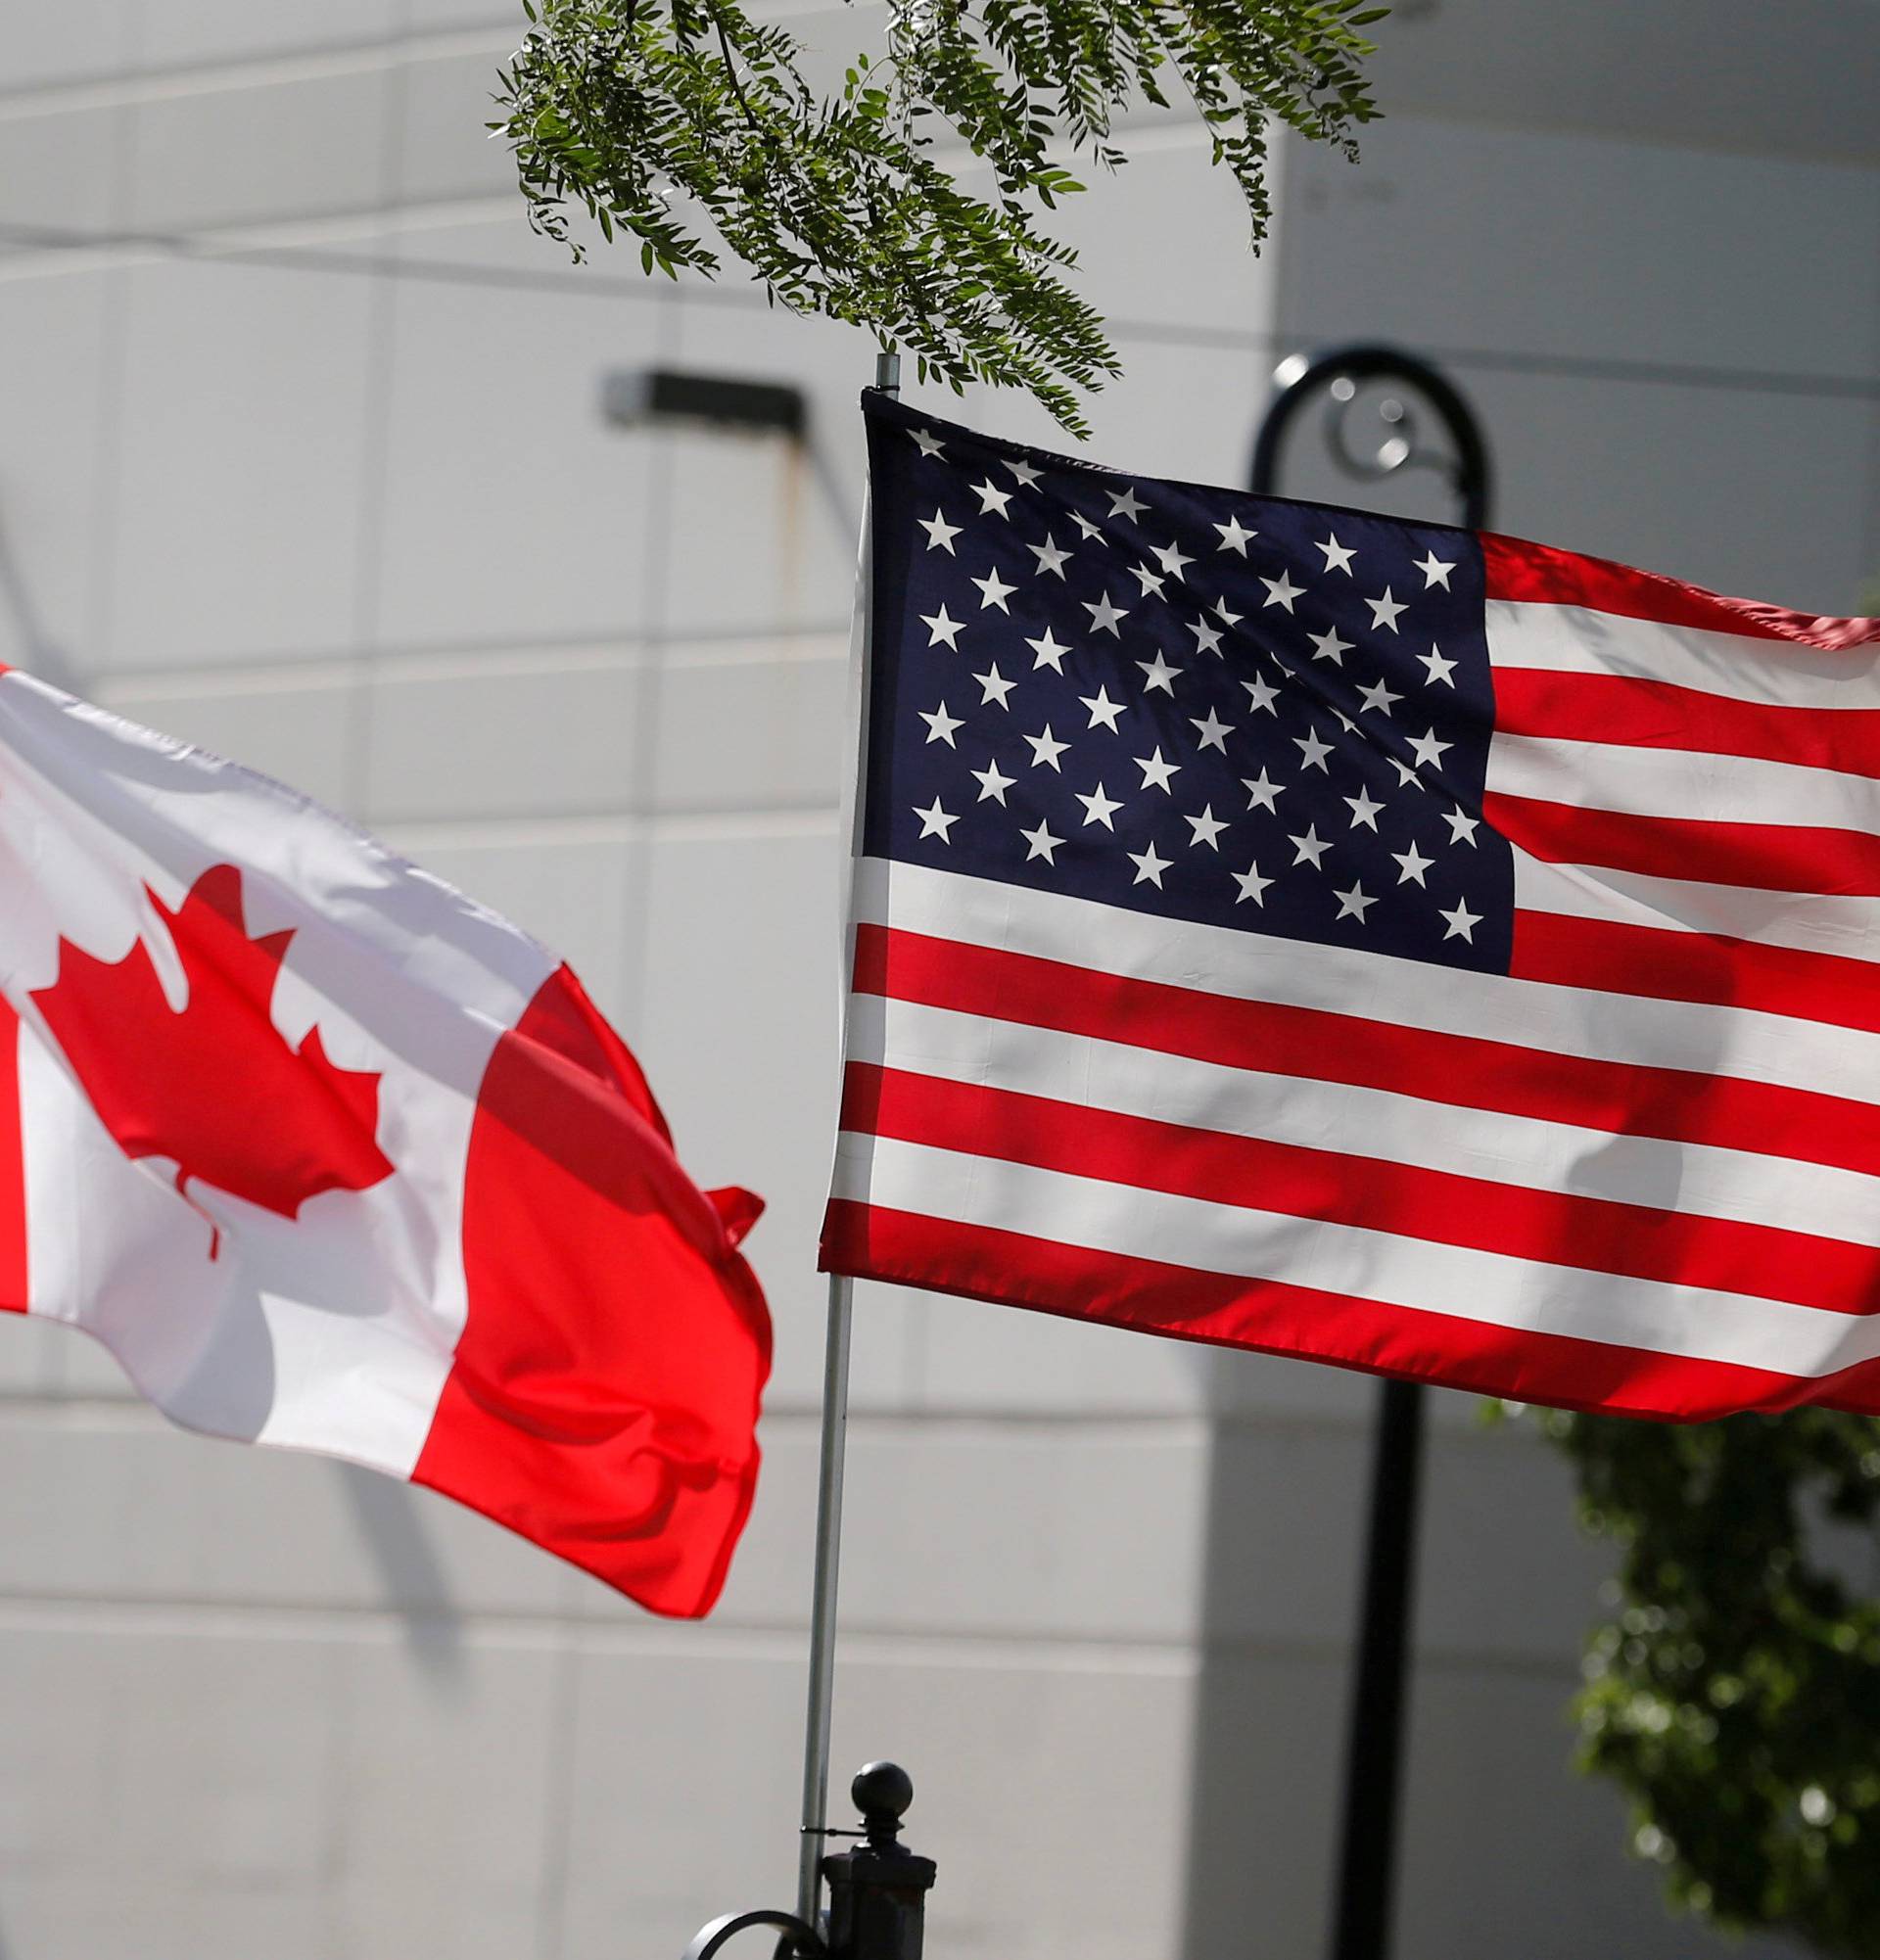 FILE PHOTO: Flags of the U.S., Canada and Mexico fly next to each other in Detroit, Michigan